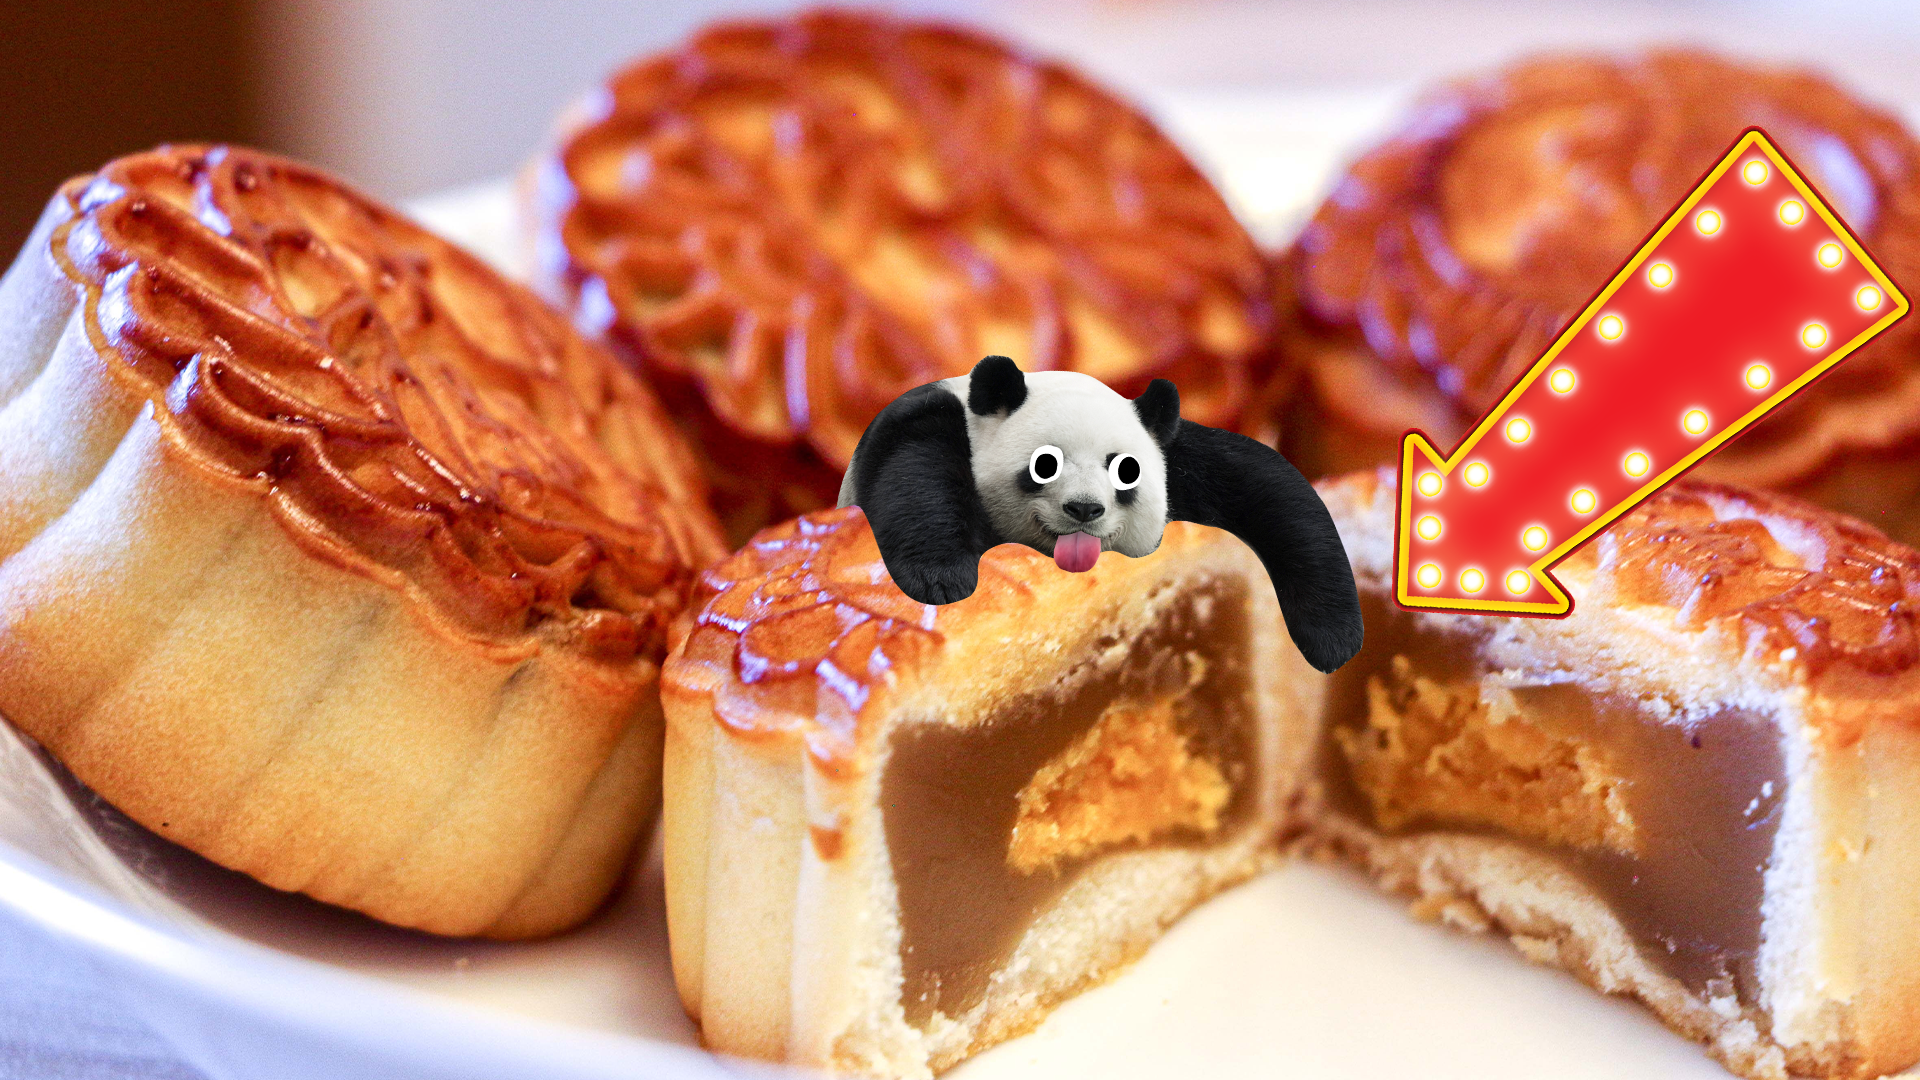 Mooncakes with derpy panda and arrow